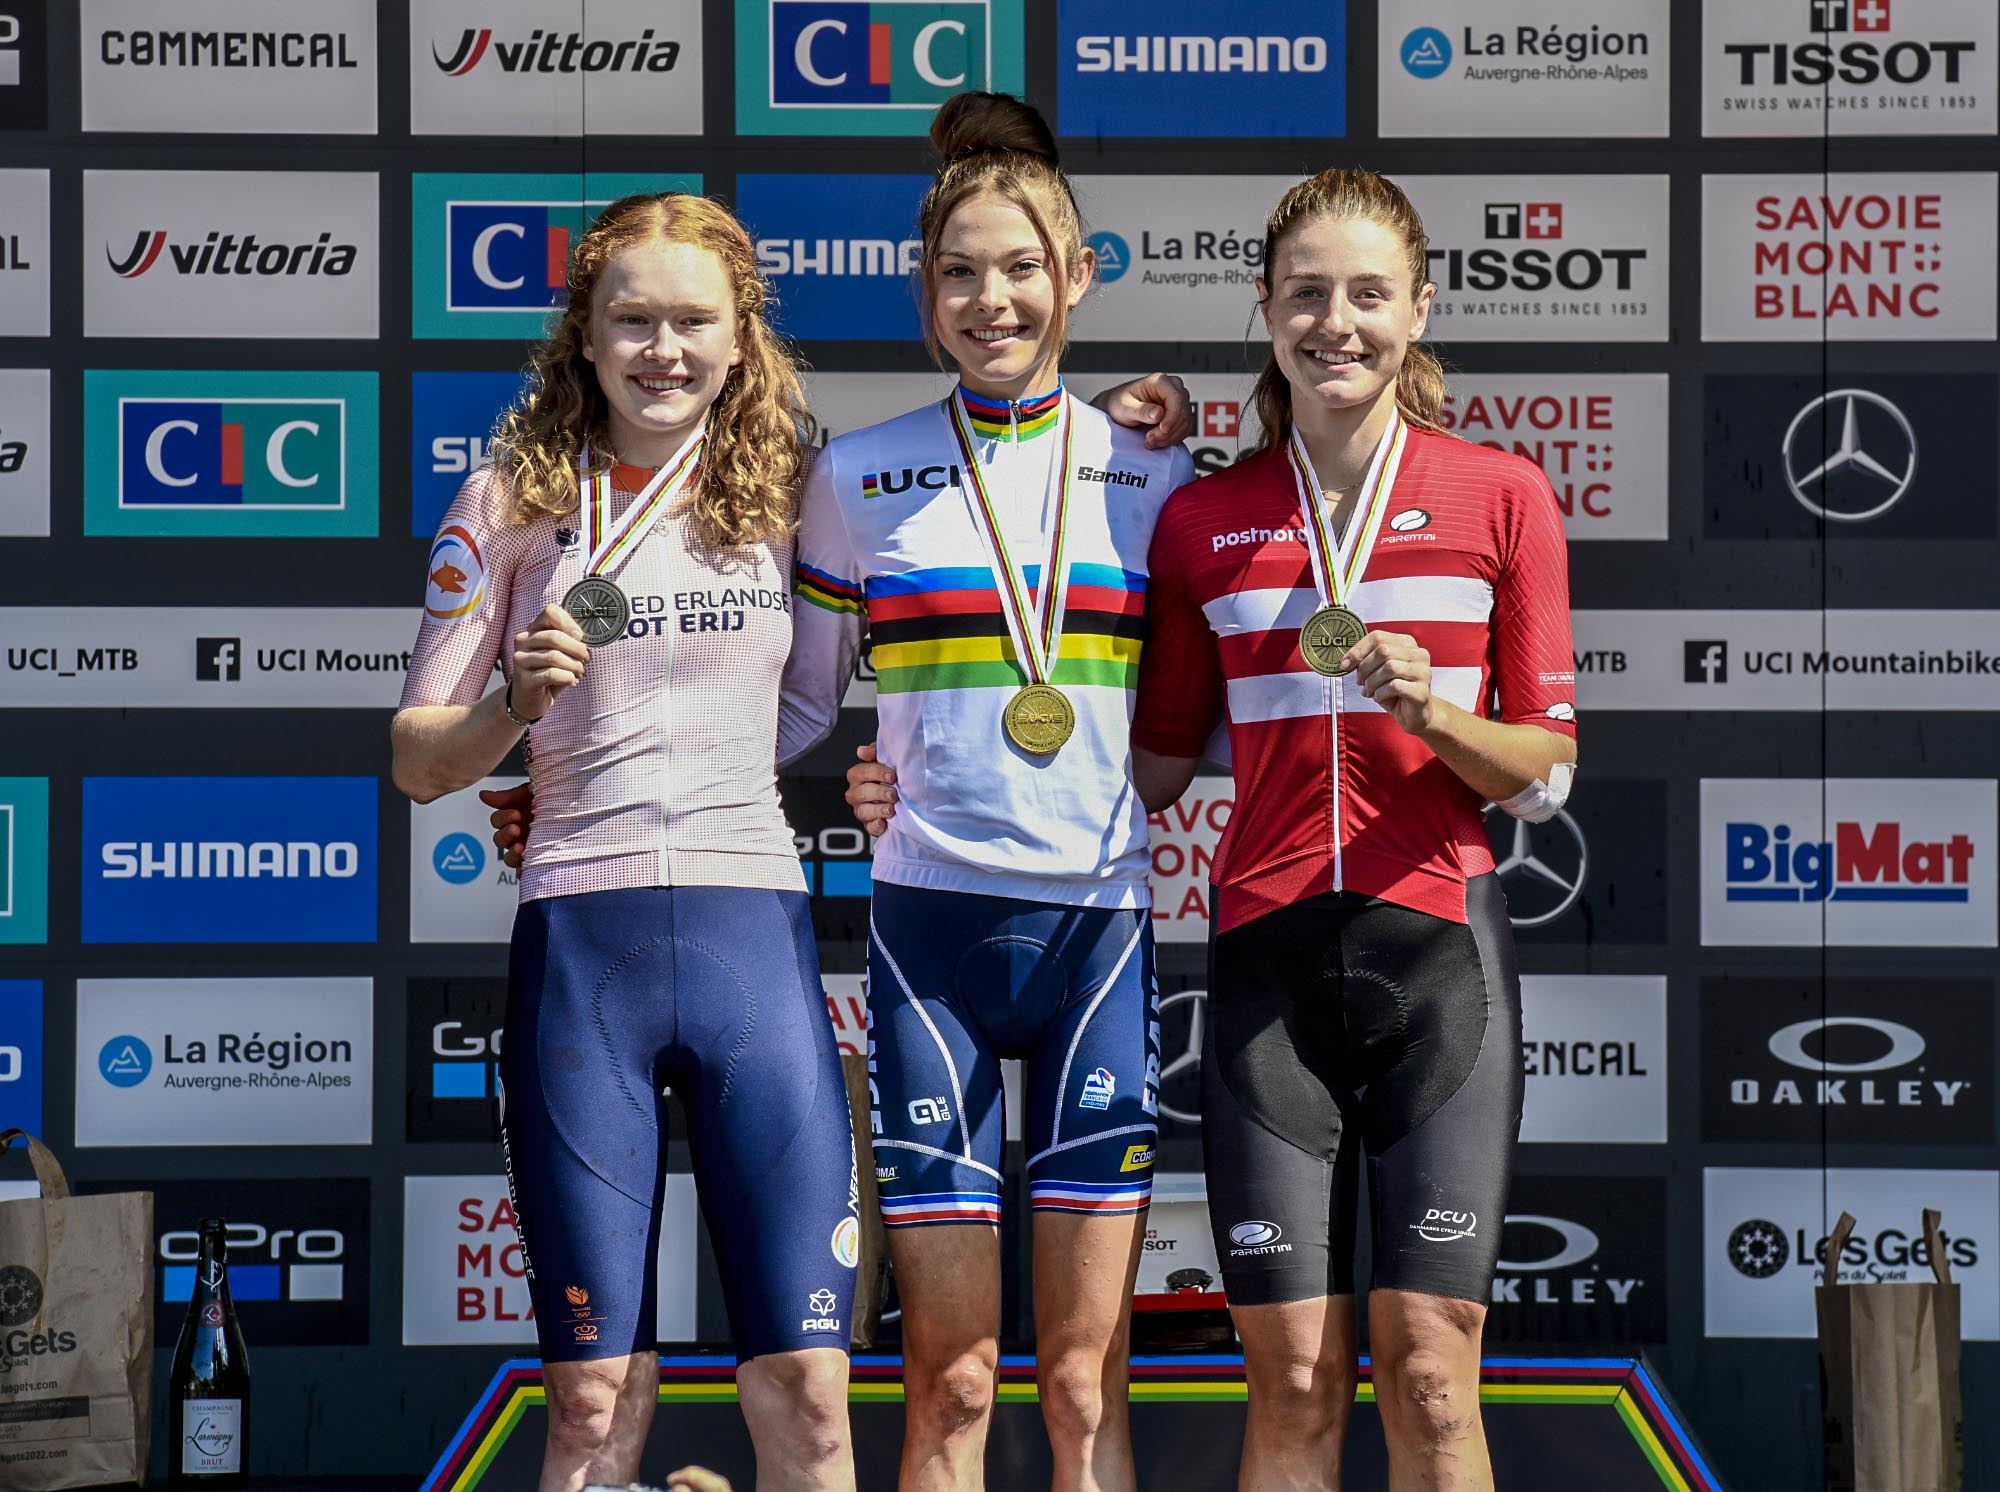 France takes under-23 XCO women's title while Italy scores U23 win for men at MTB Worlds